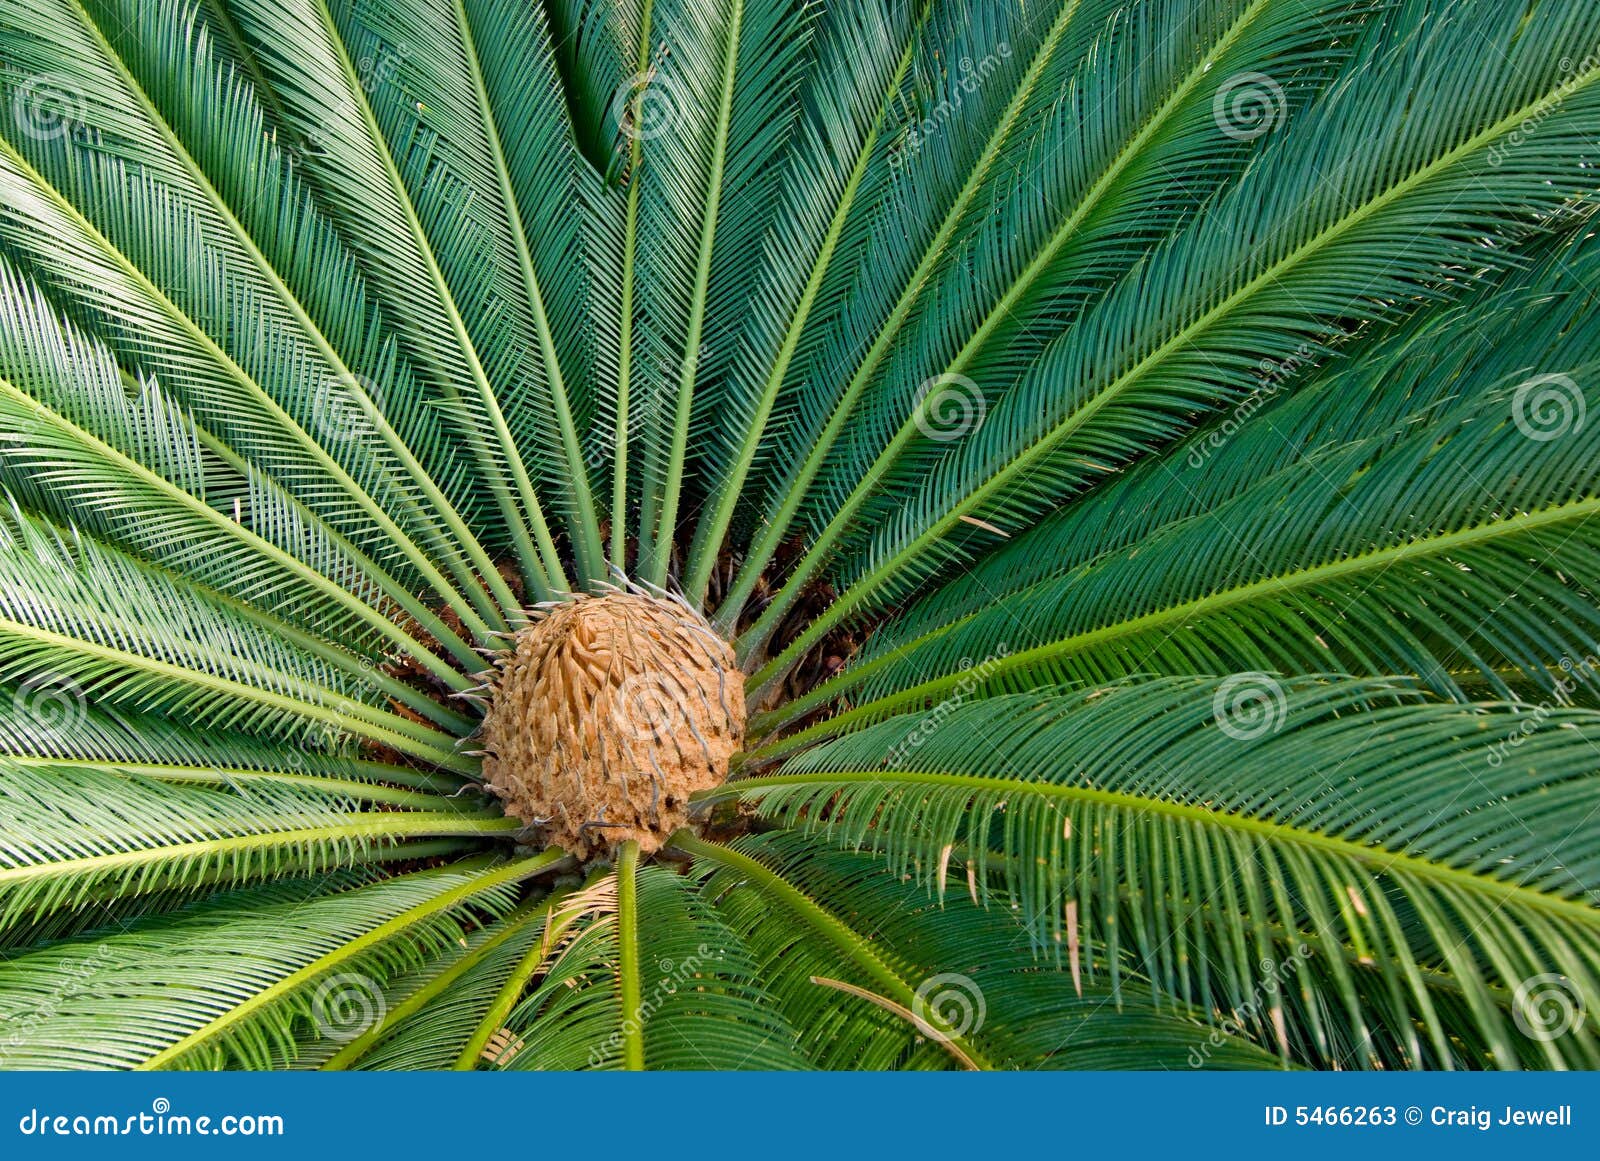 cycad plant from above